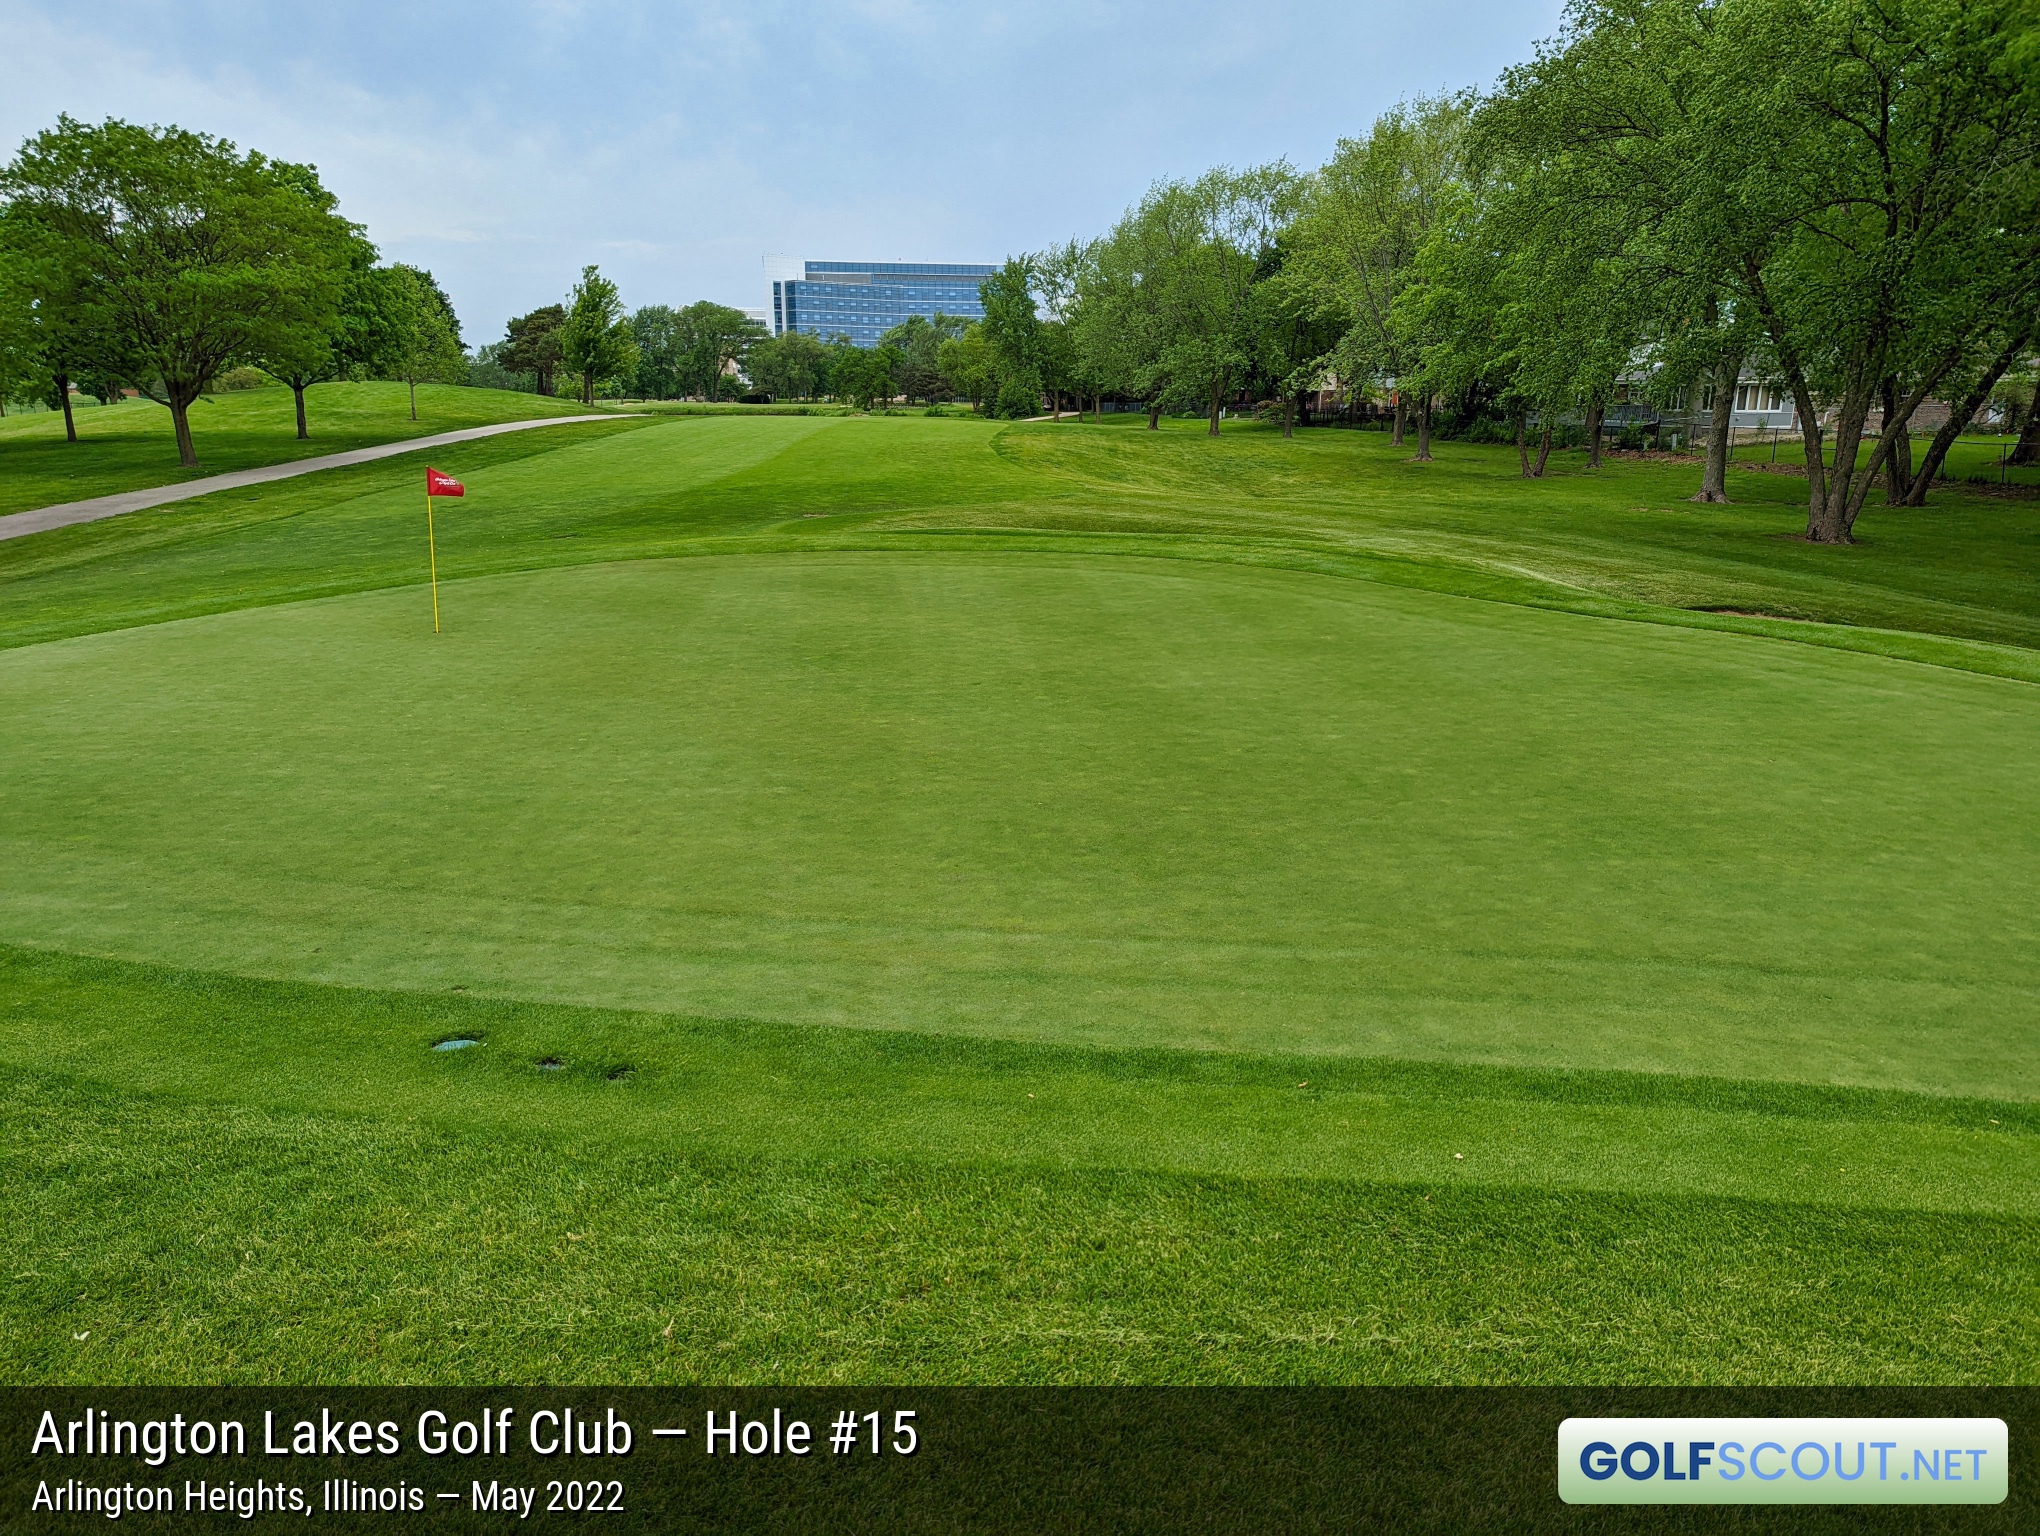 Photo of hole #15 at Arlington Lakes Golf Club in Arlington Heights, Illinois. View of the hole from the back of the green.